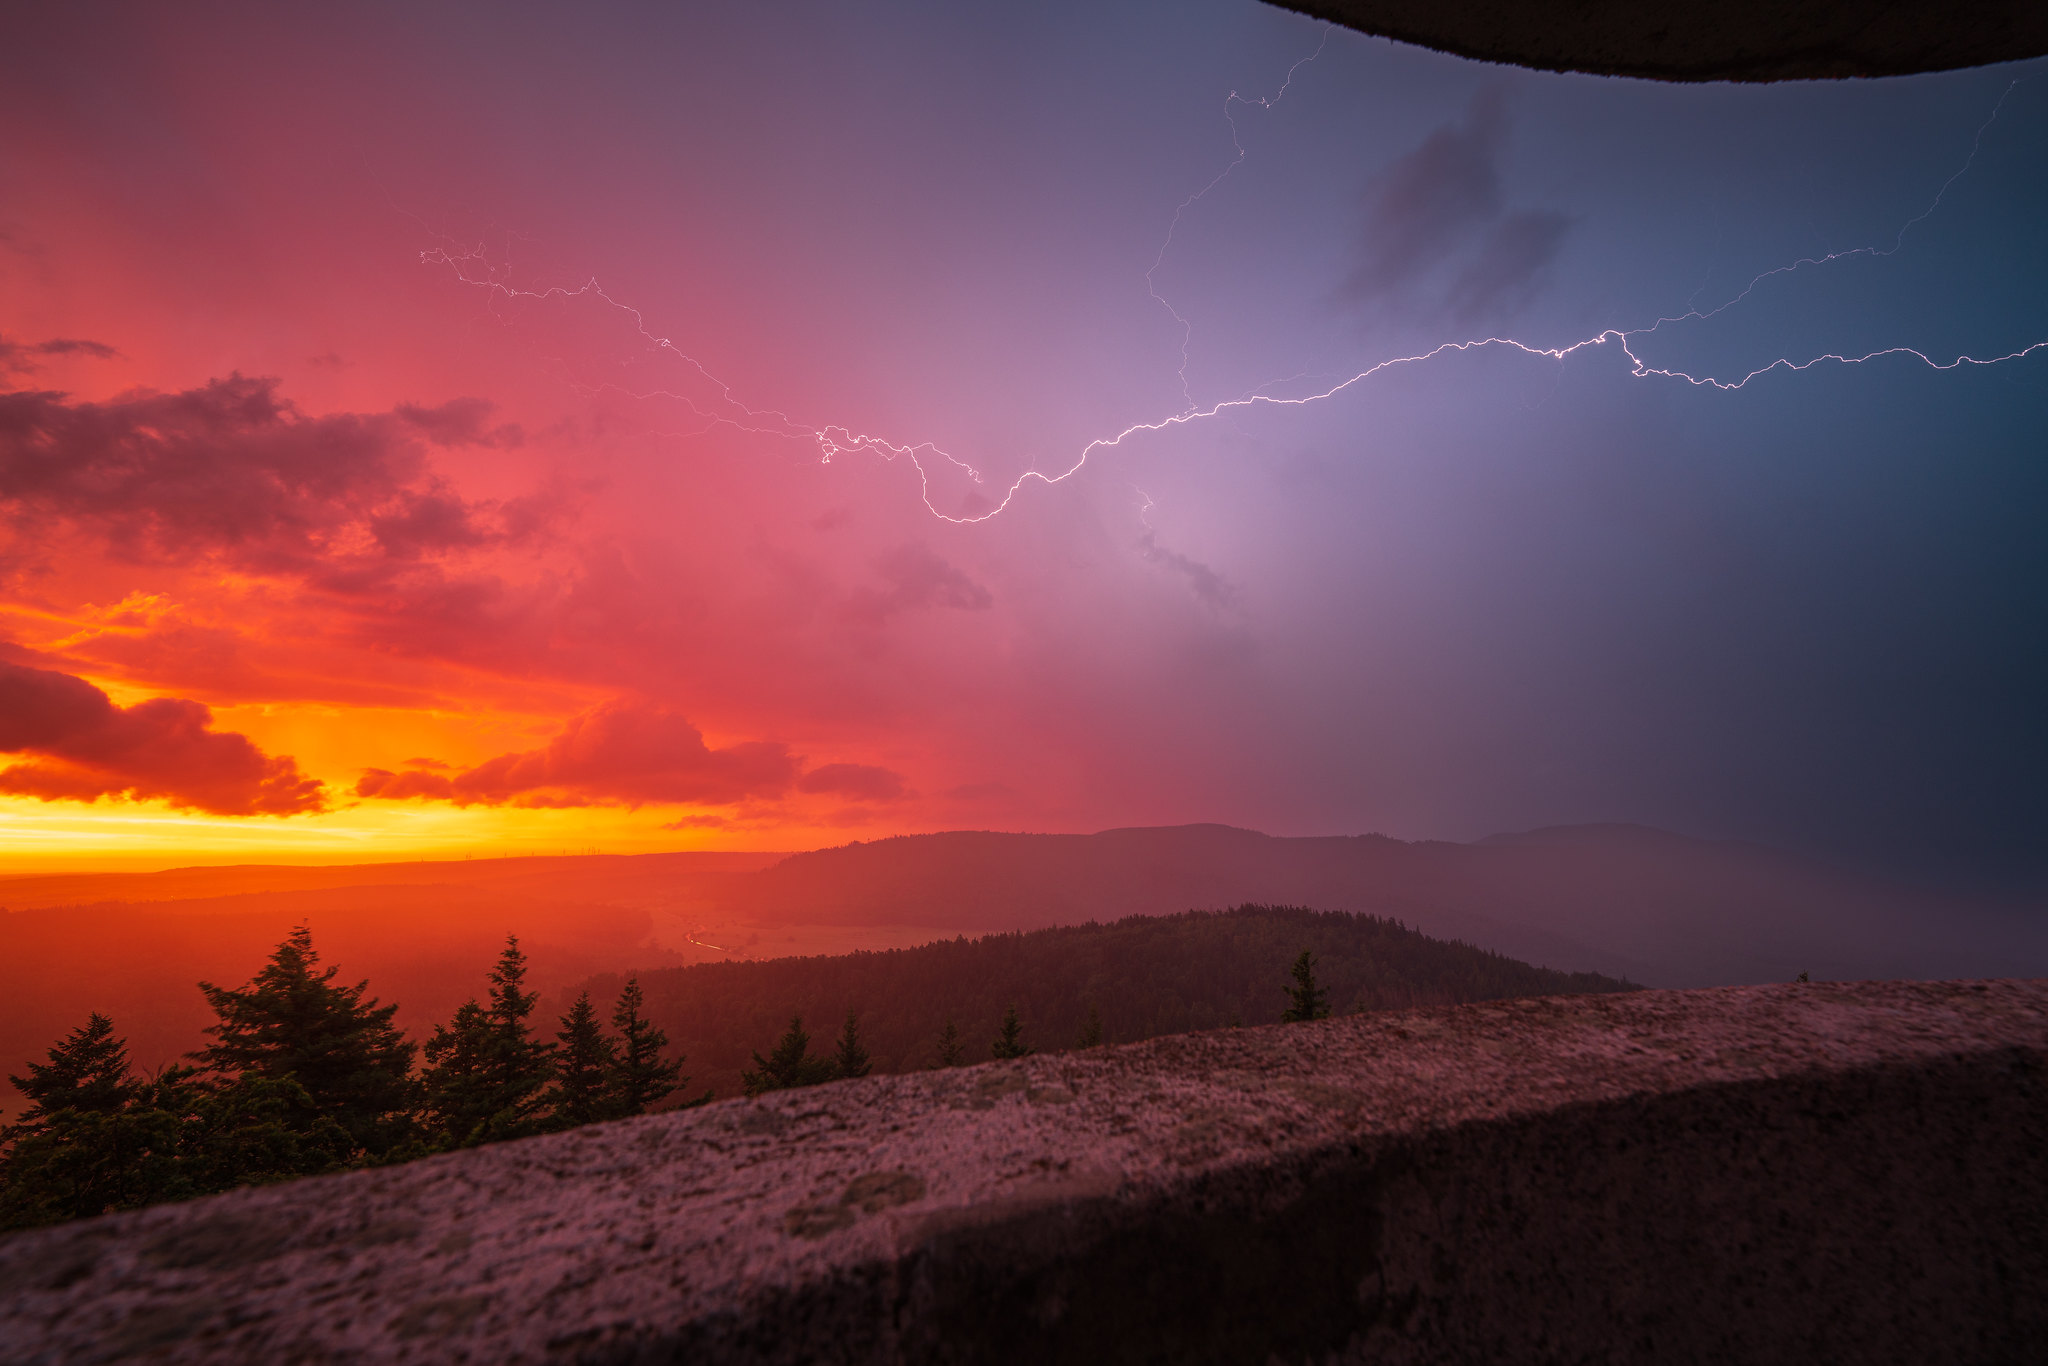 General 2048x1366 lightning storm photography sunrise sunset glow landscape sky trees clouds red sky nature